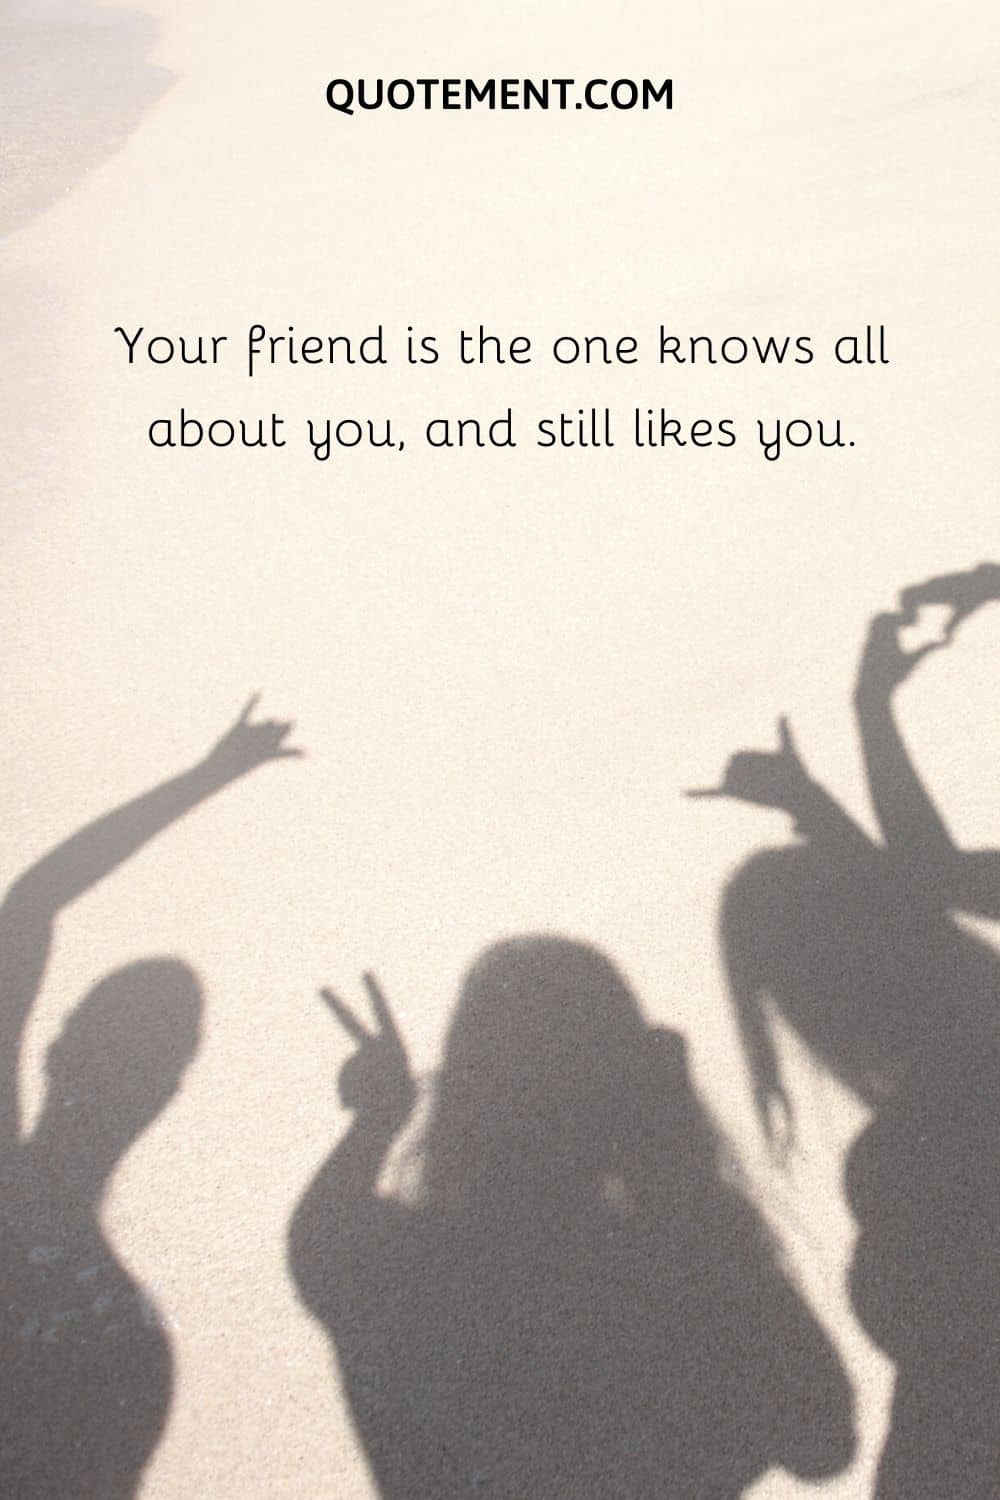 Your friend is the one knows all about you, and still likes you